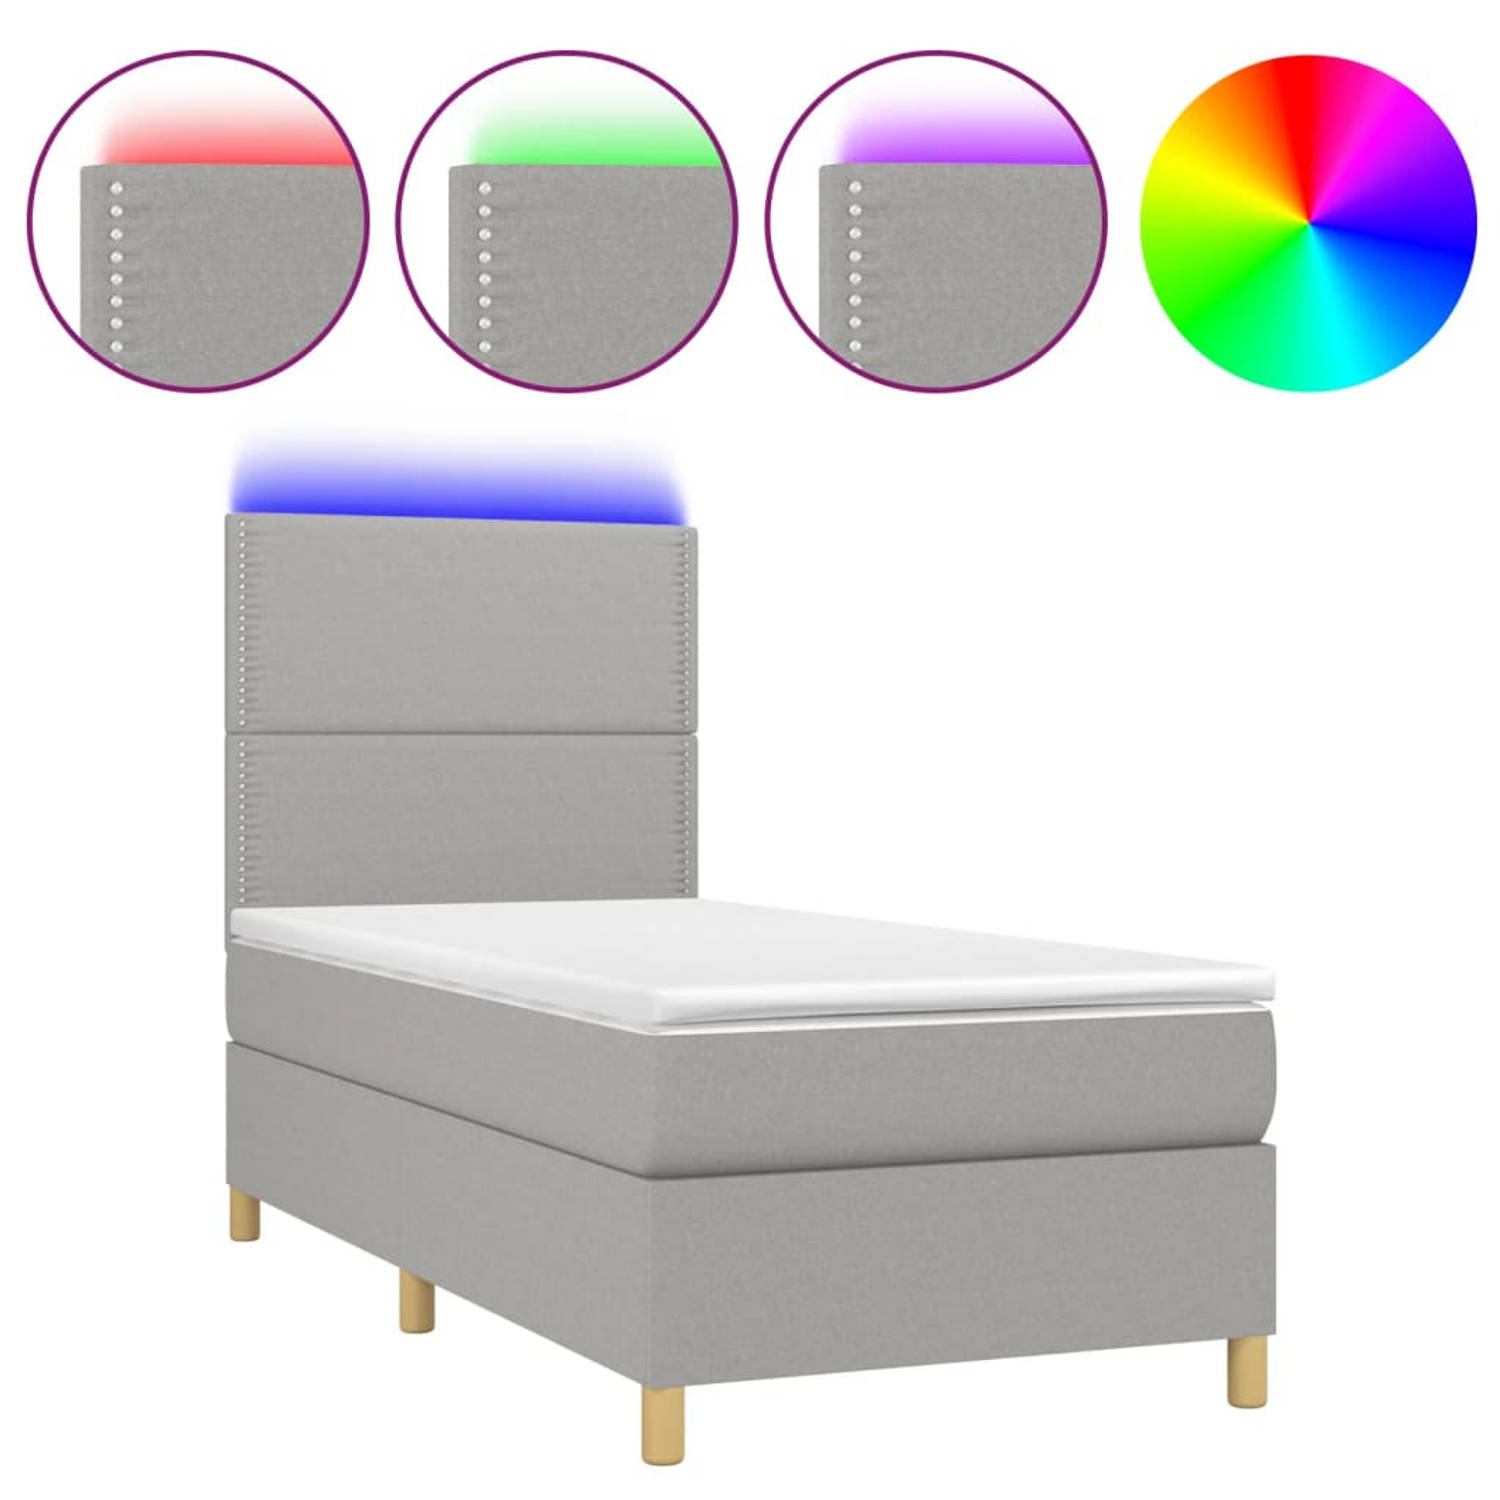 The Living Store Boxspring met matras en LED stof lichtgrijs 100x200 cm - Boxspring - Boxsprings - Bed - Slaapmeubel - Boxspringbed - Boxspring Bed - Tweepersoonsbed - Bed Met Matr